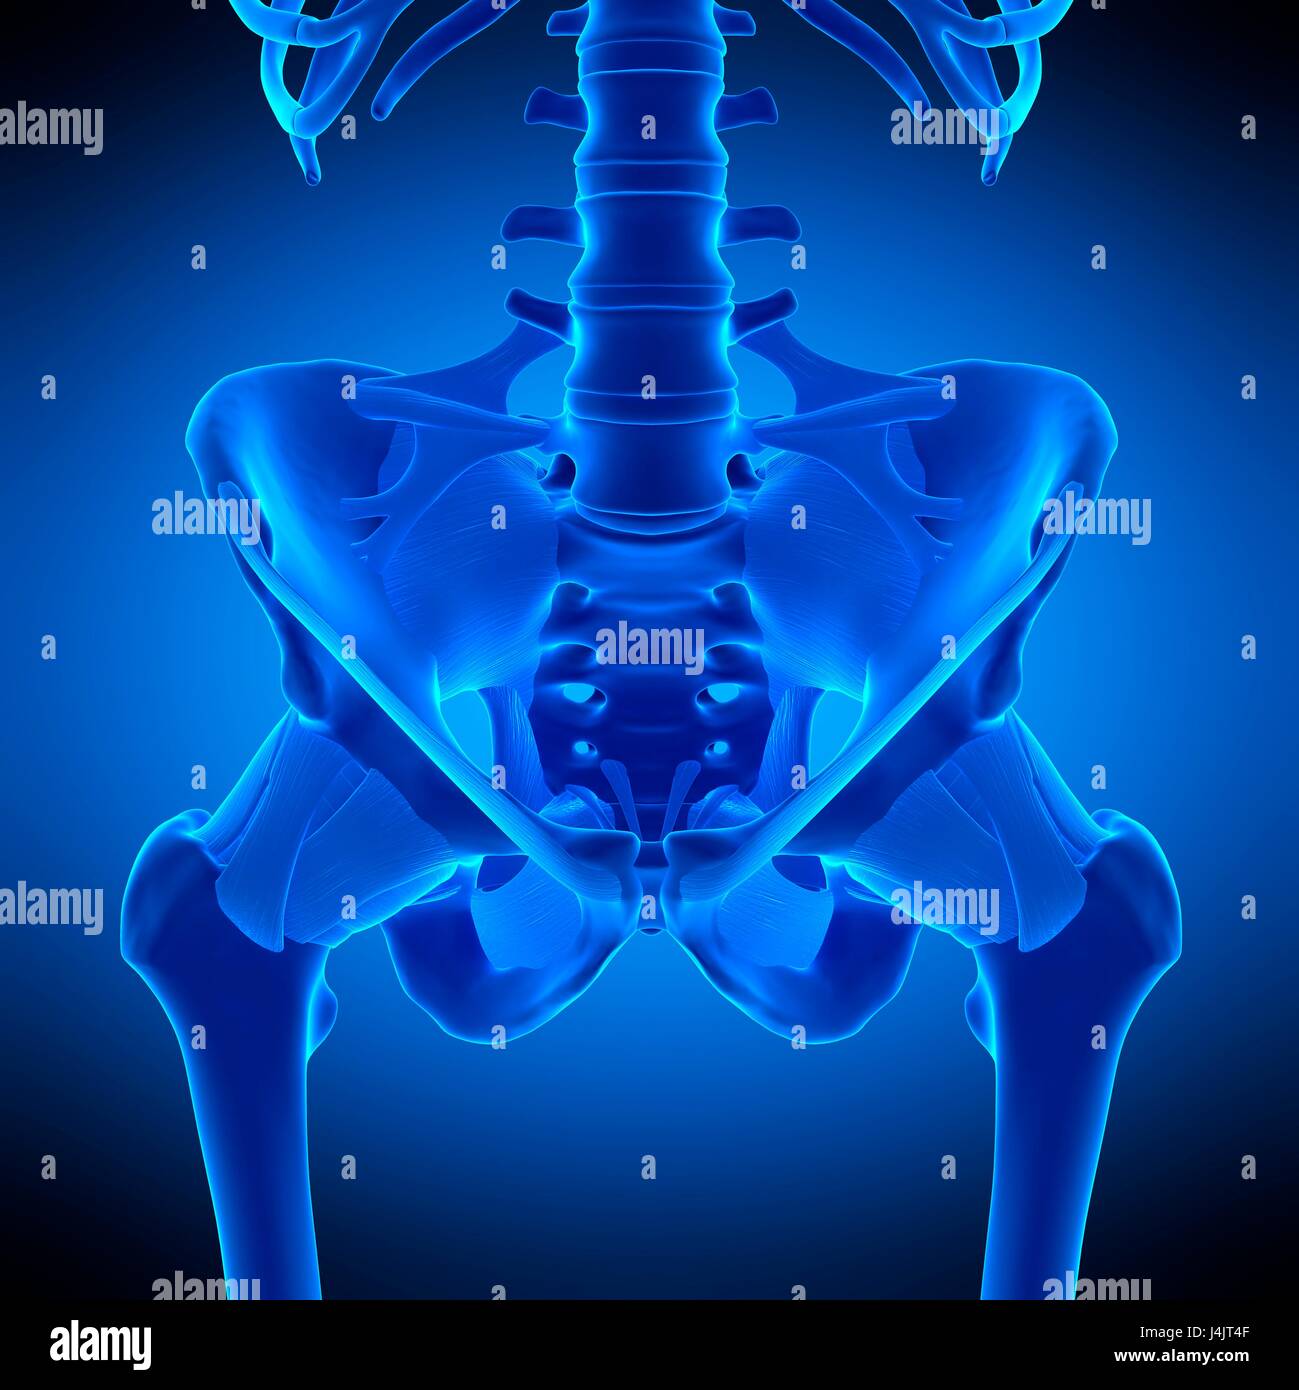 Illustration of the hip ligaments. Stock Photo